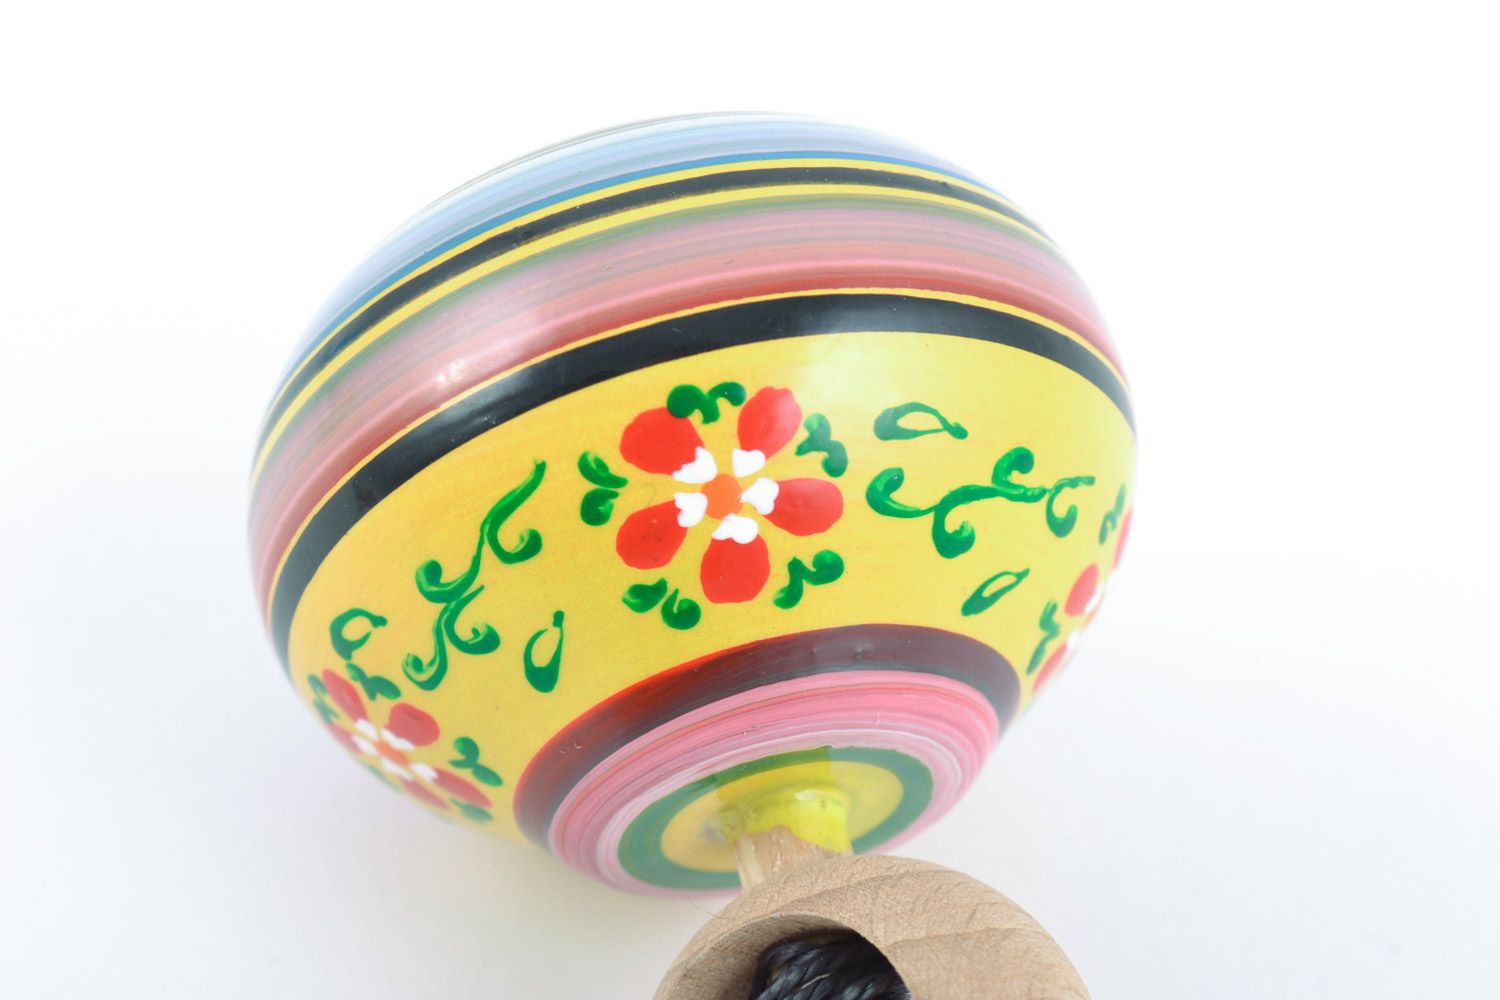 Homemade eco friendly wooden toy spinning top painted with ornaments for kids photo 3